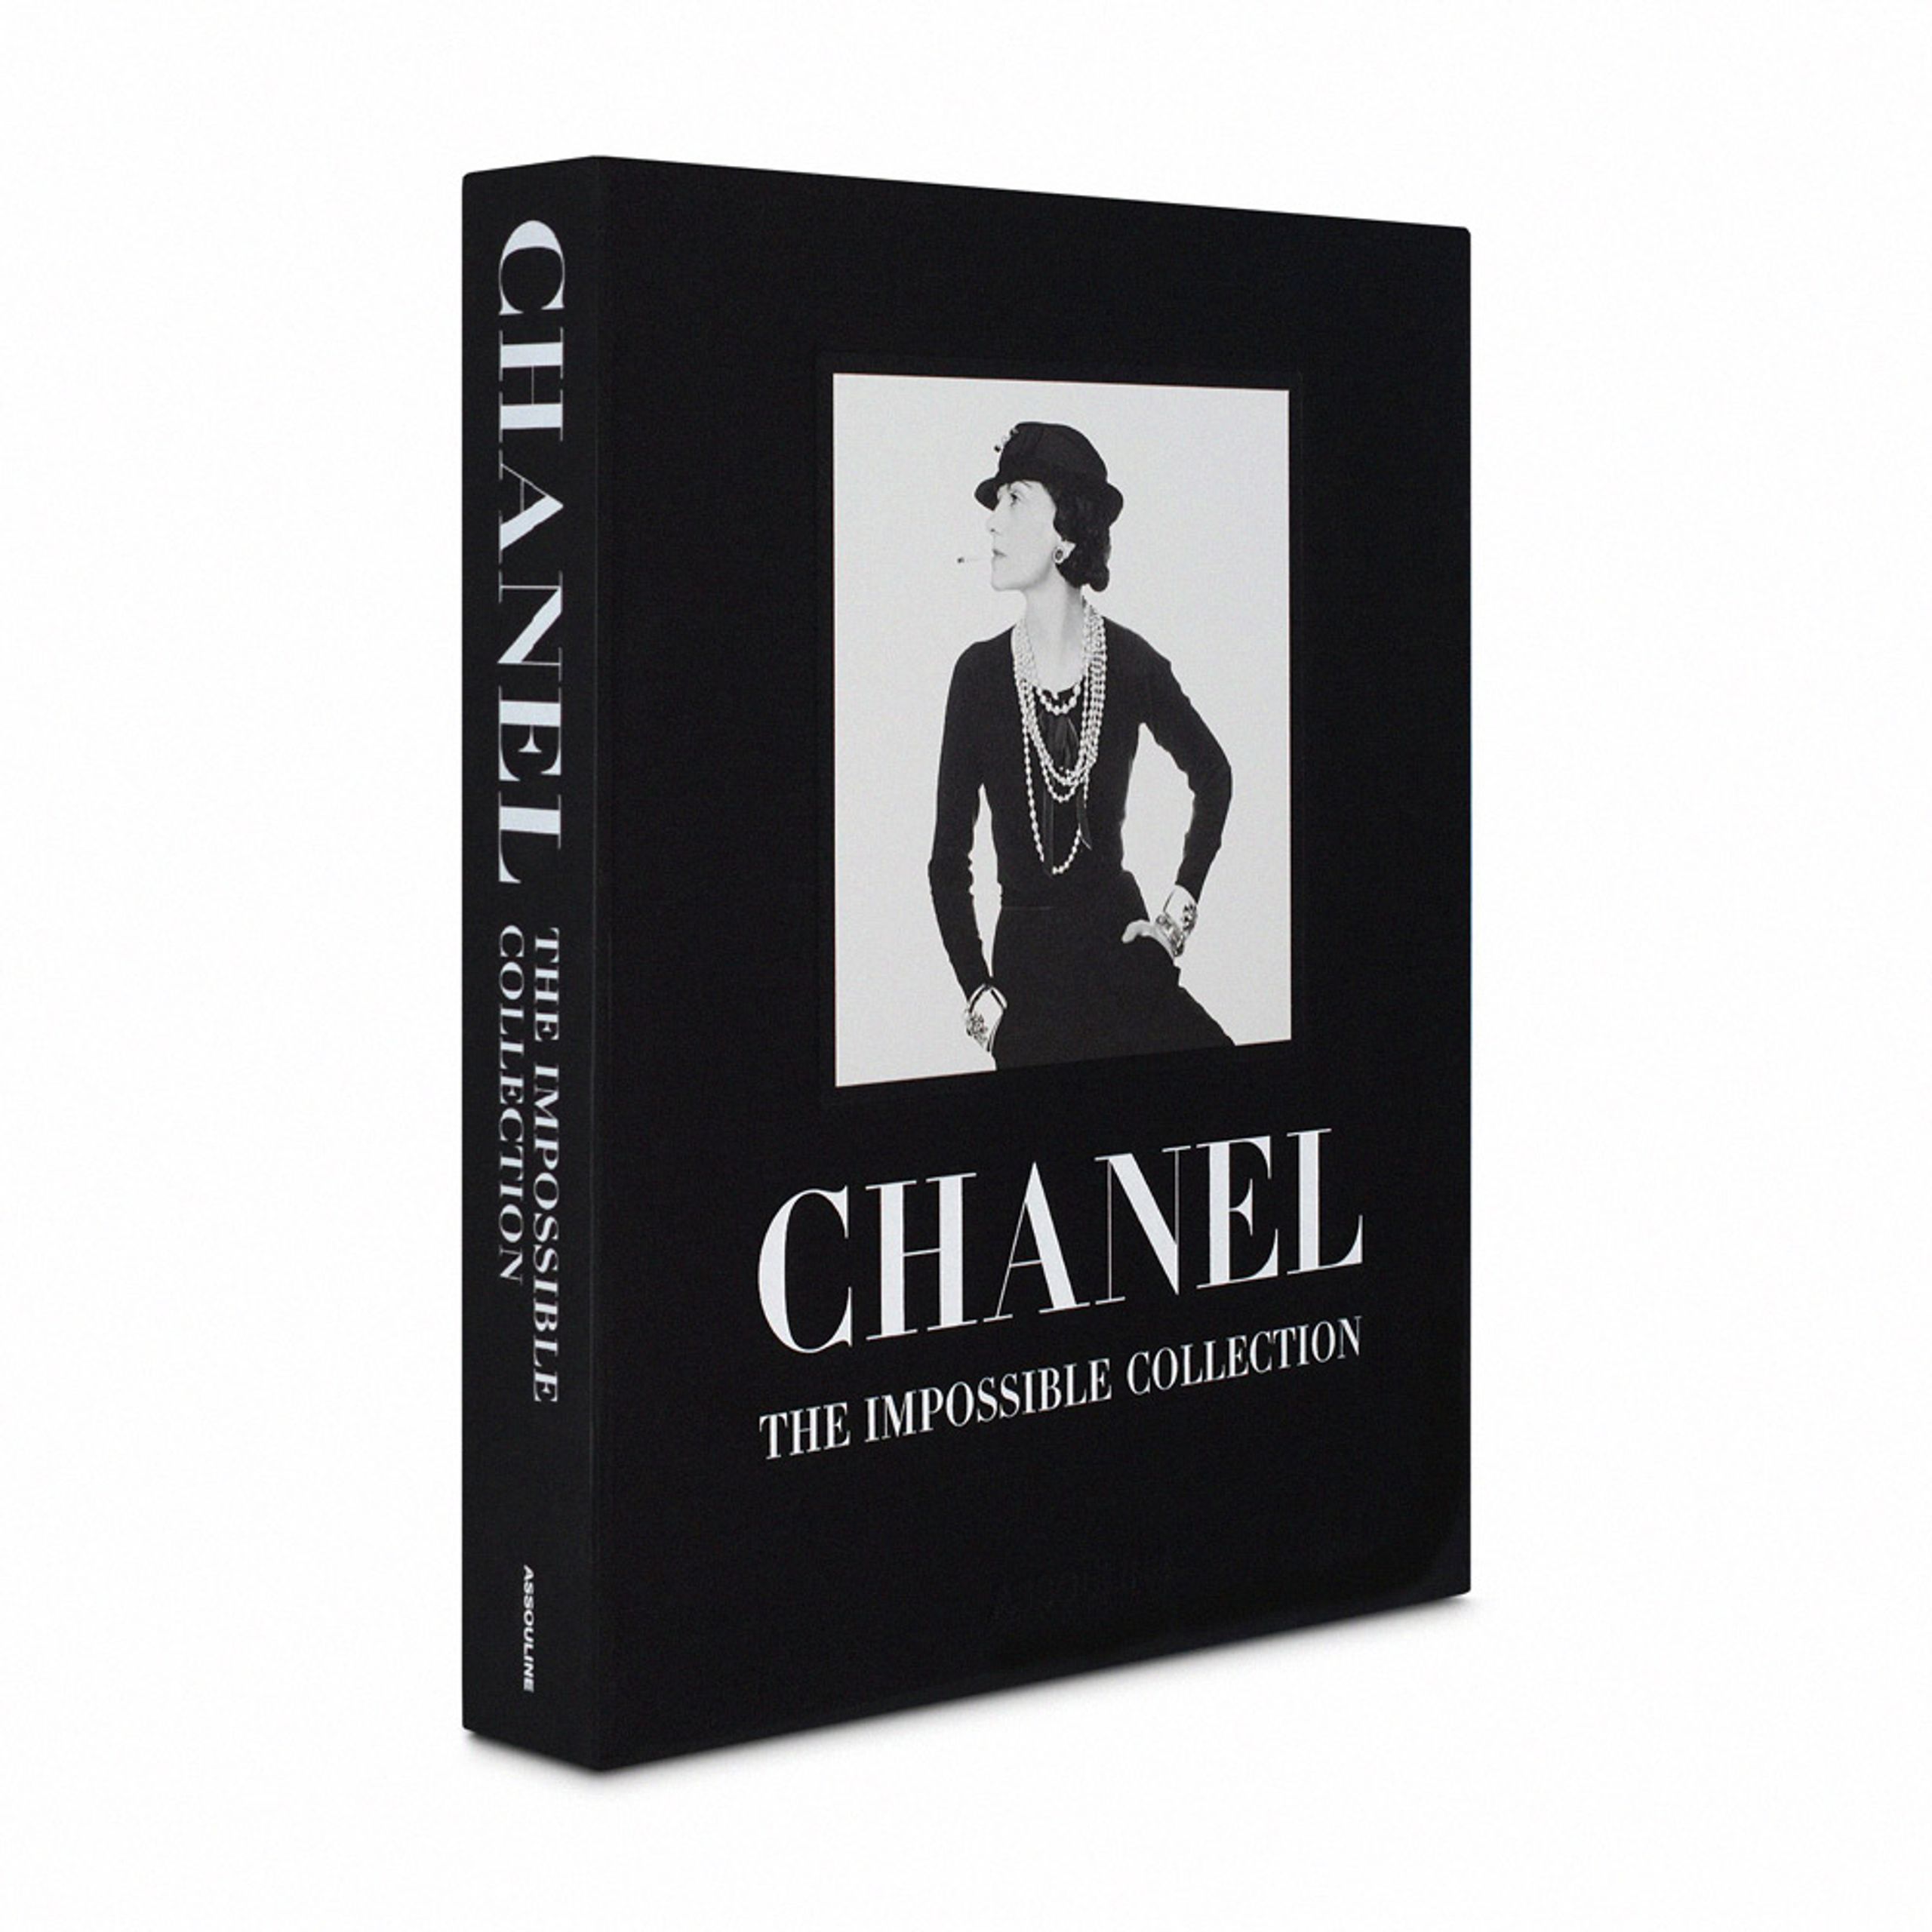 feminin Kan beregnes Hykler The Impossible Collection - Chanel - Bog - New Mags